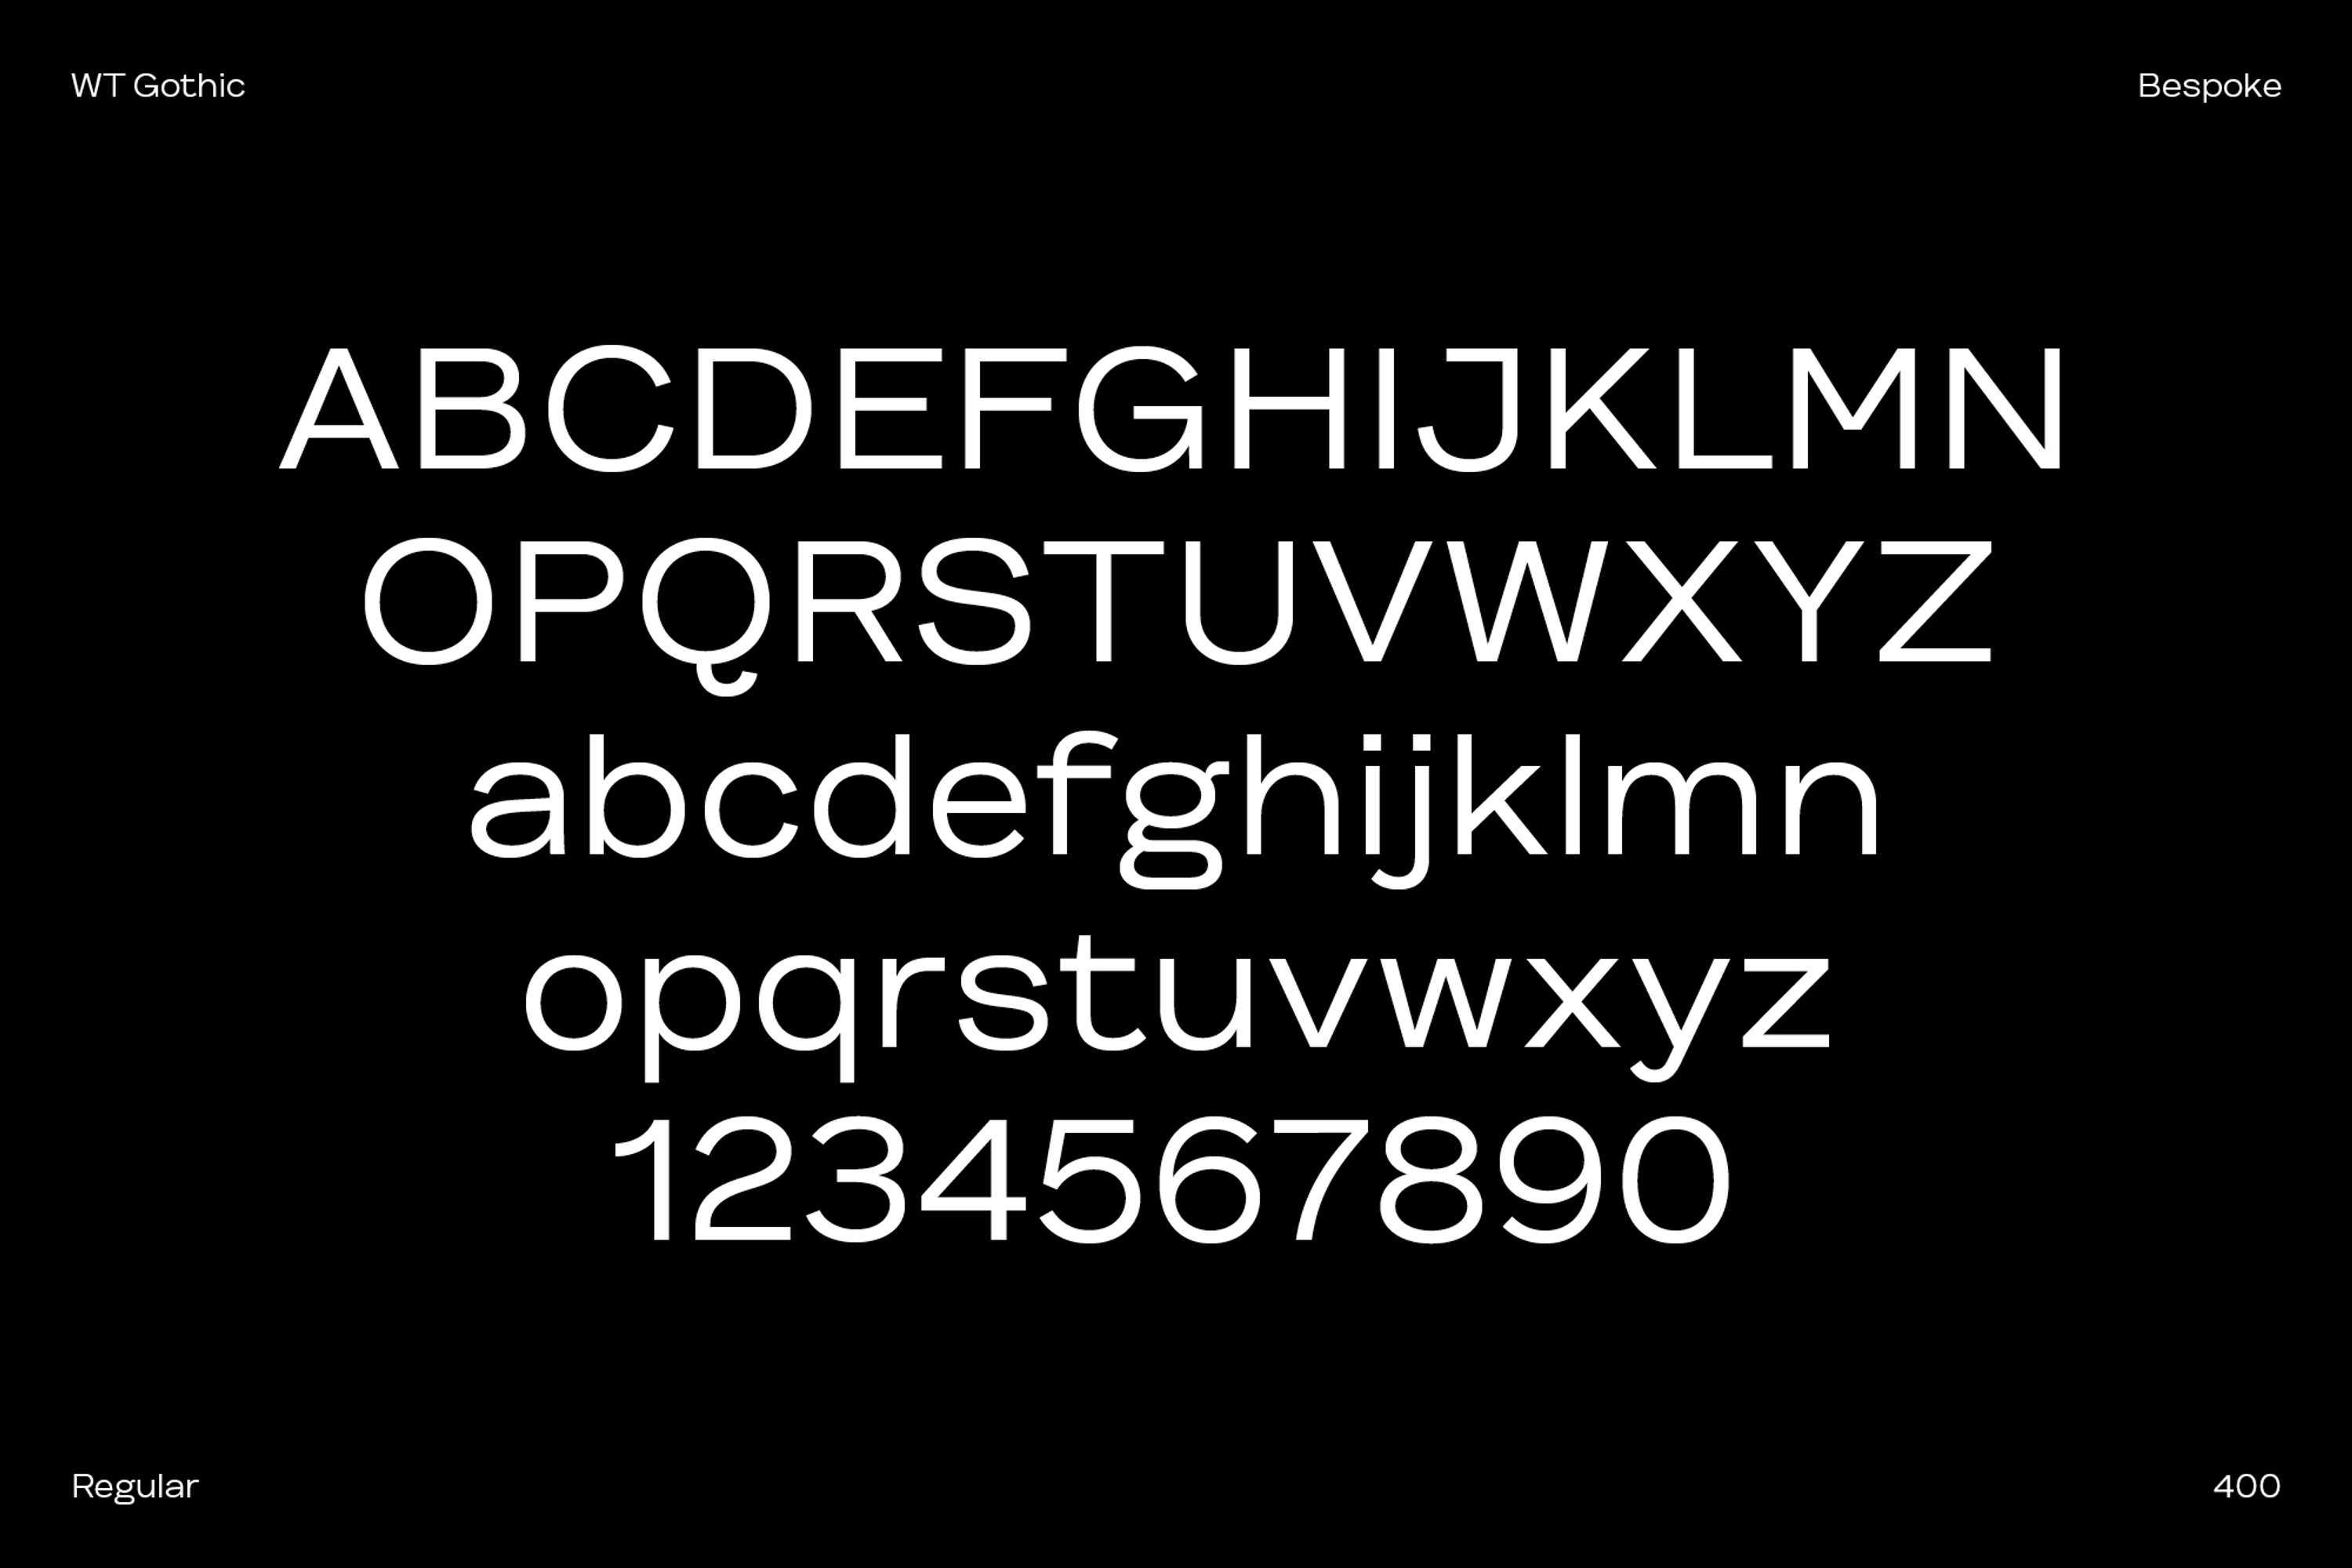 WT Gothic Regular Font preview